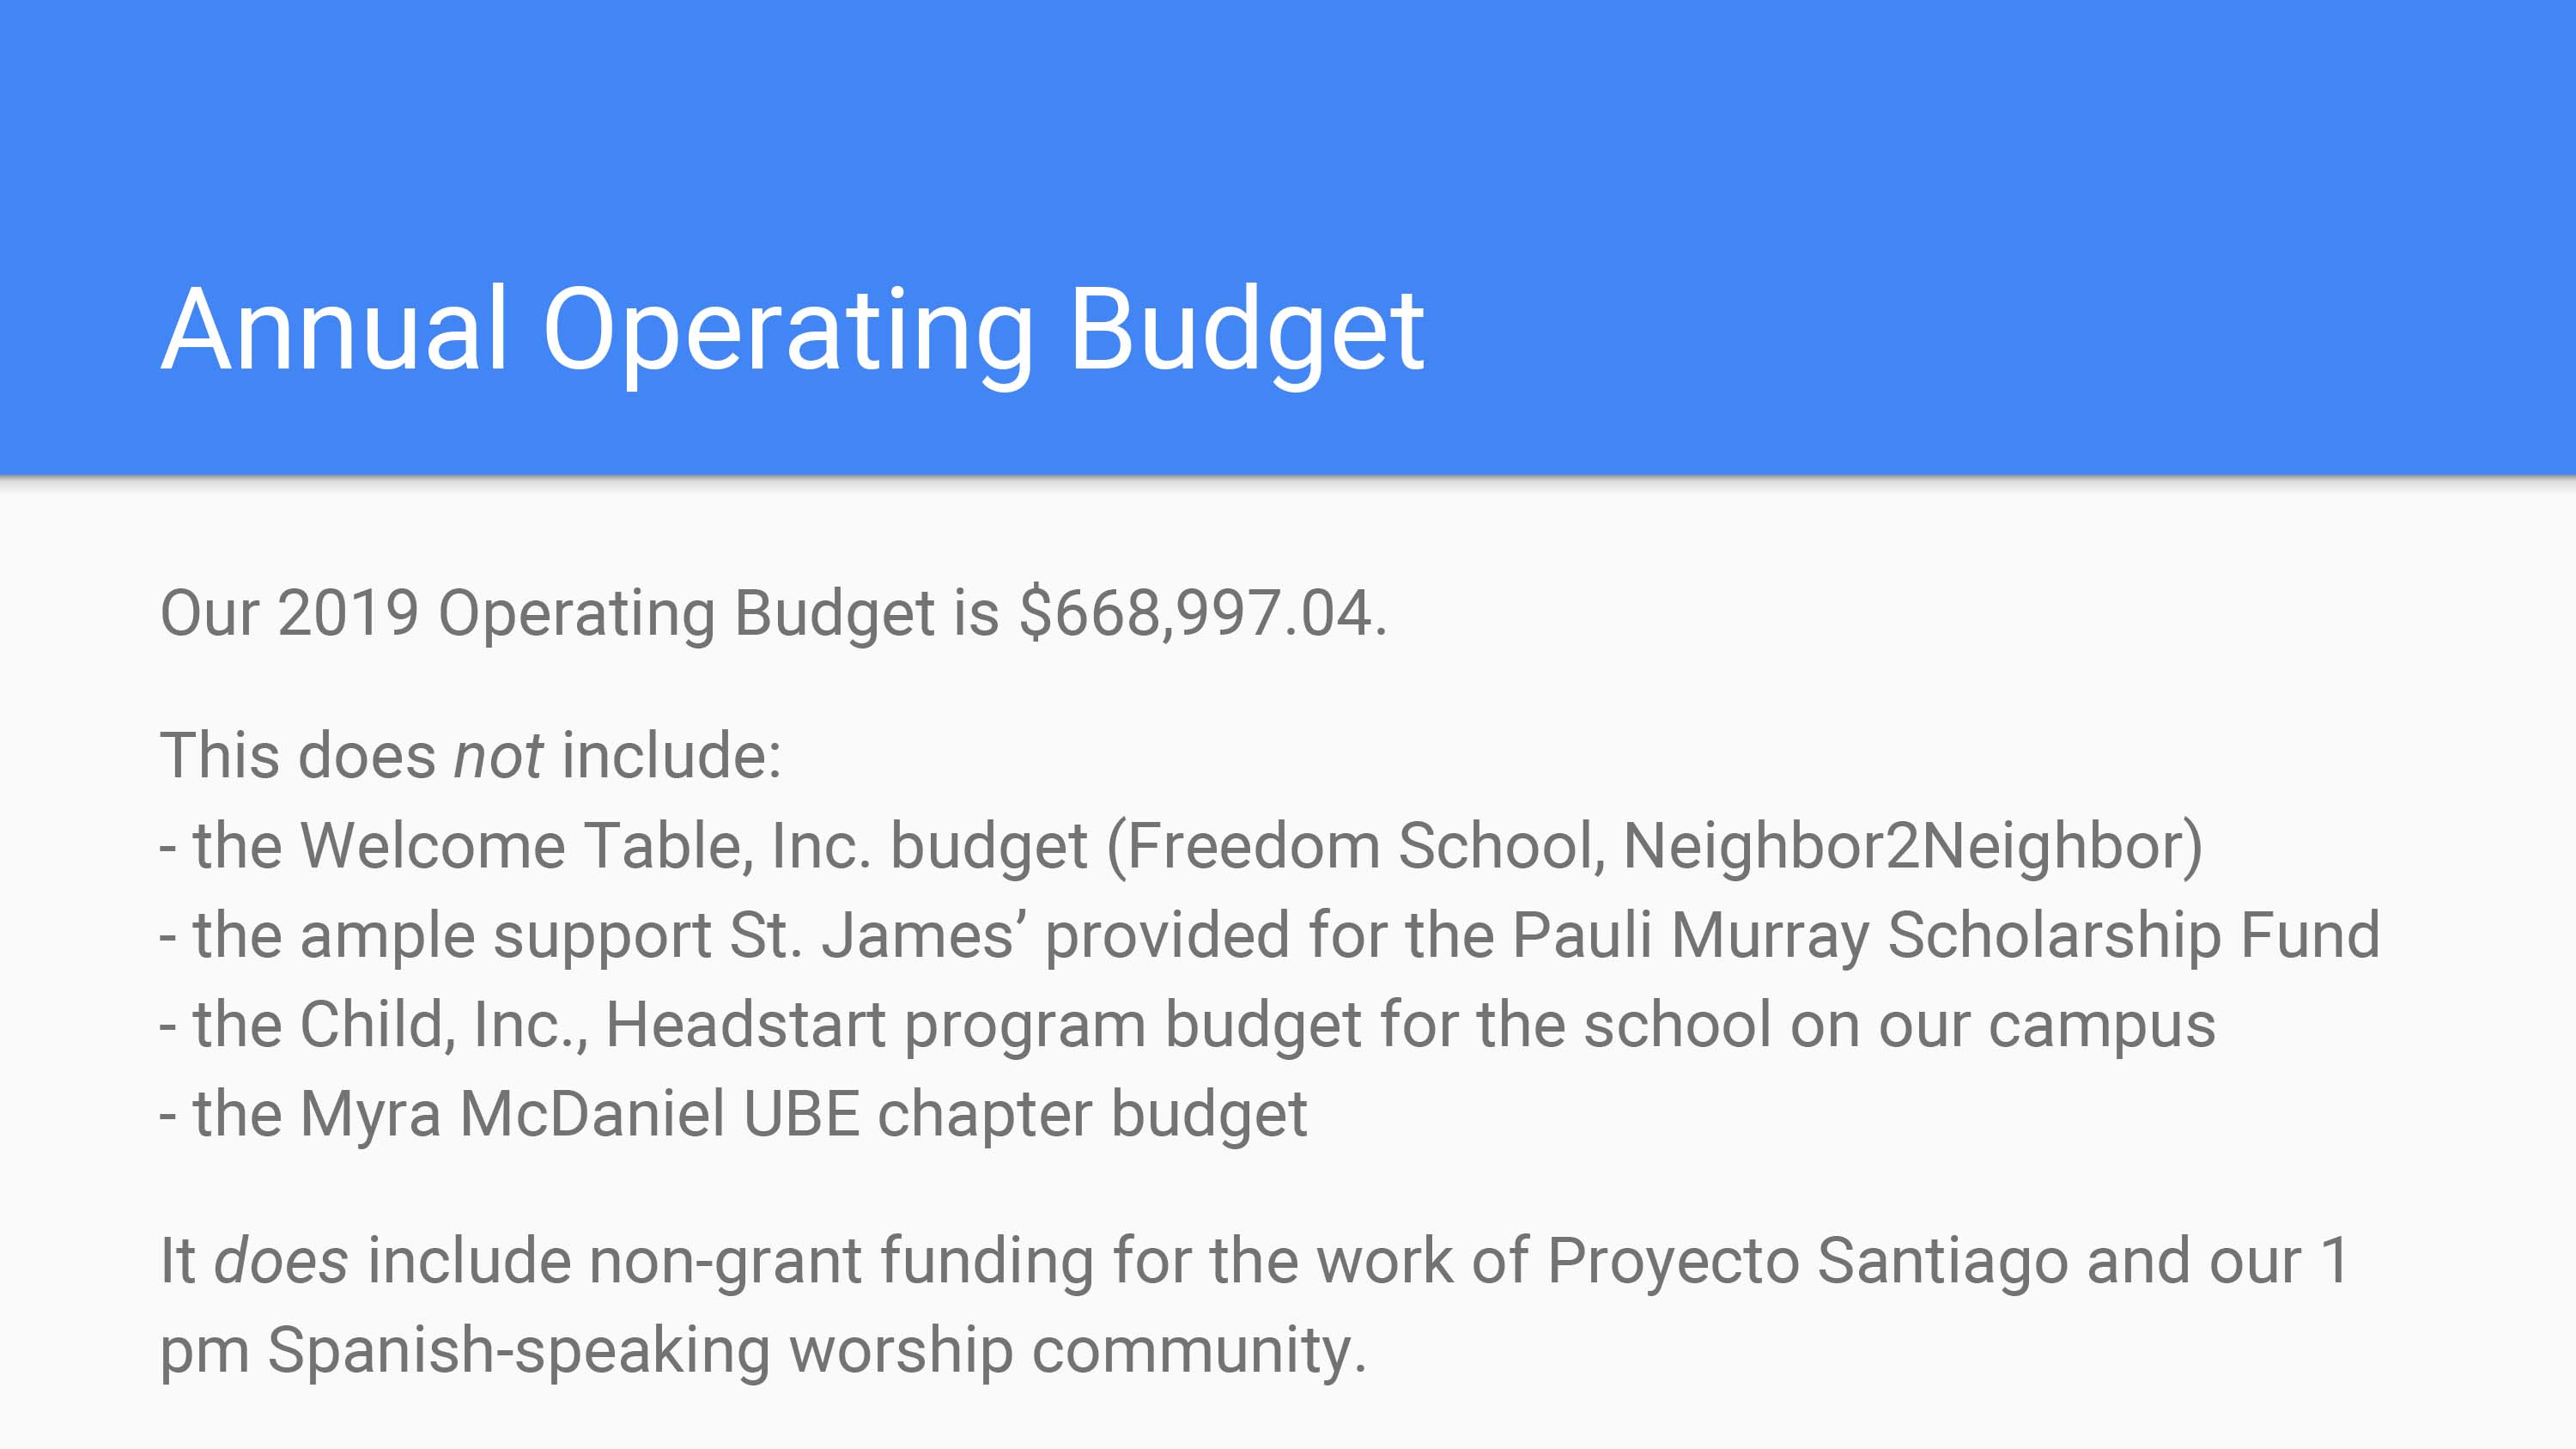 Annual Operating Budget (Includes description of budget)